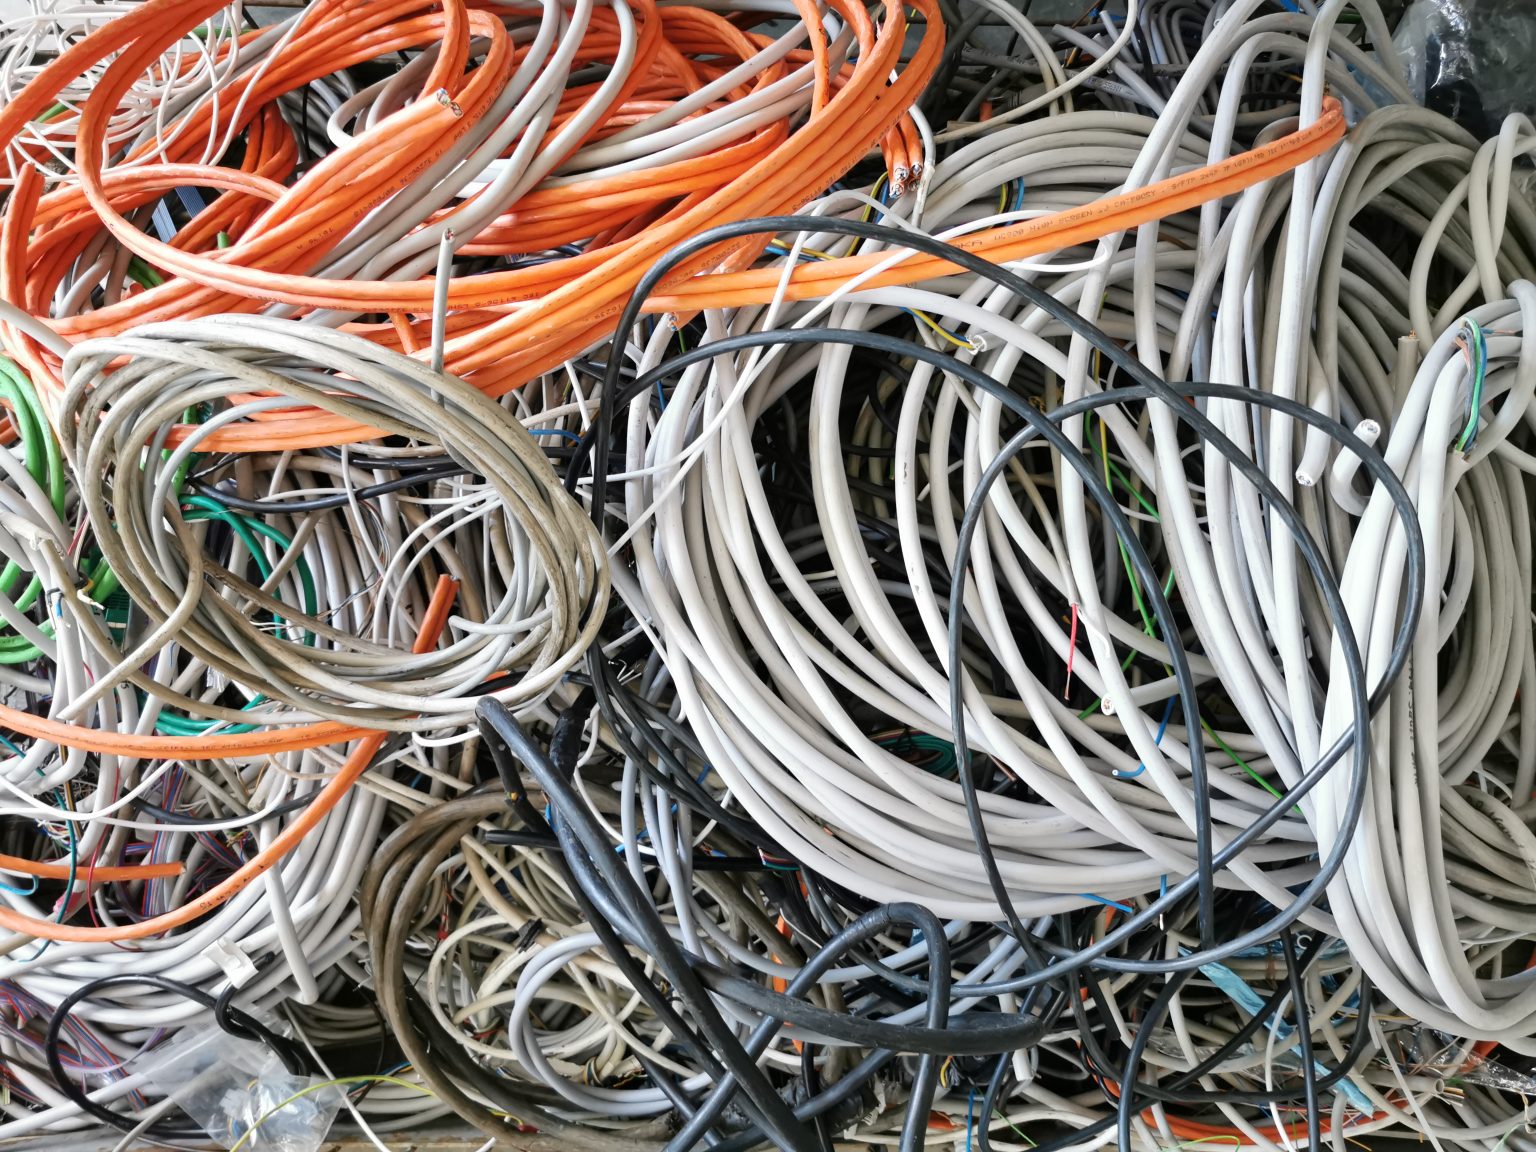 Cable,Scrap,Collected,In,A,Box,For,Melting,Down,And